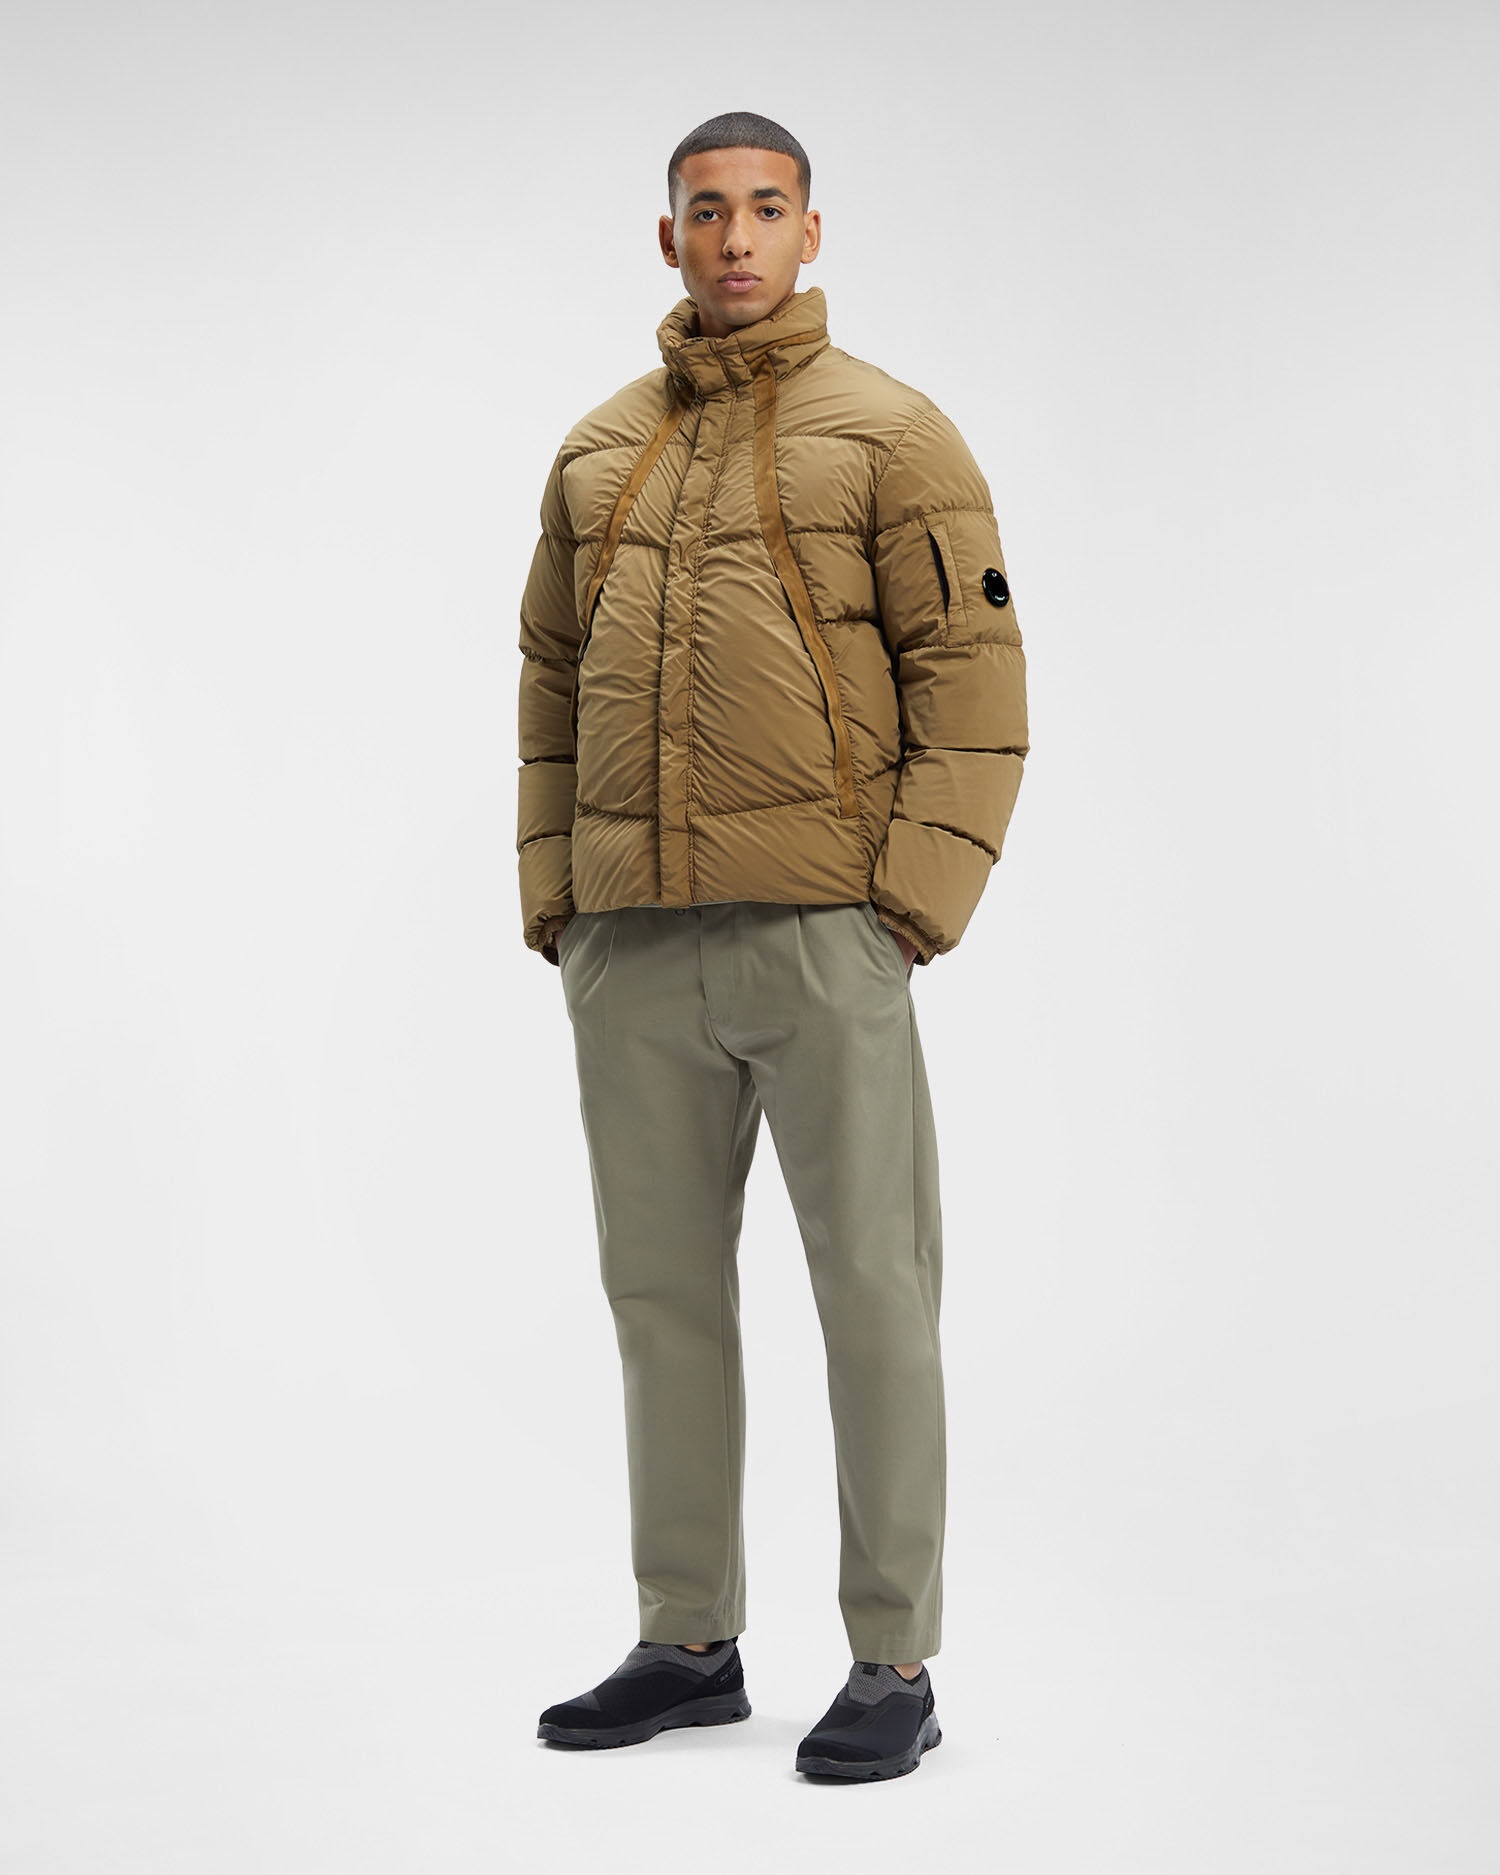 C.P. Company Nycra-R Down Jacket | REVERSIBLE